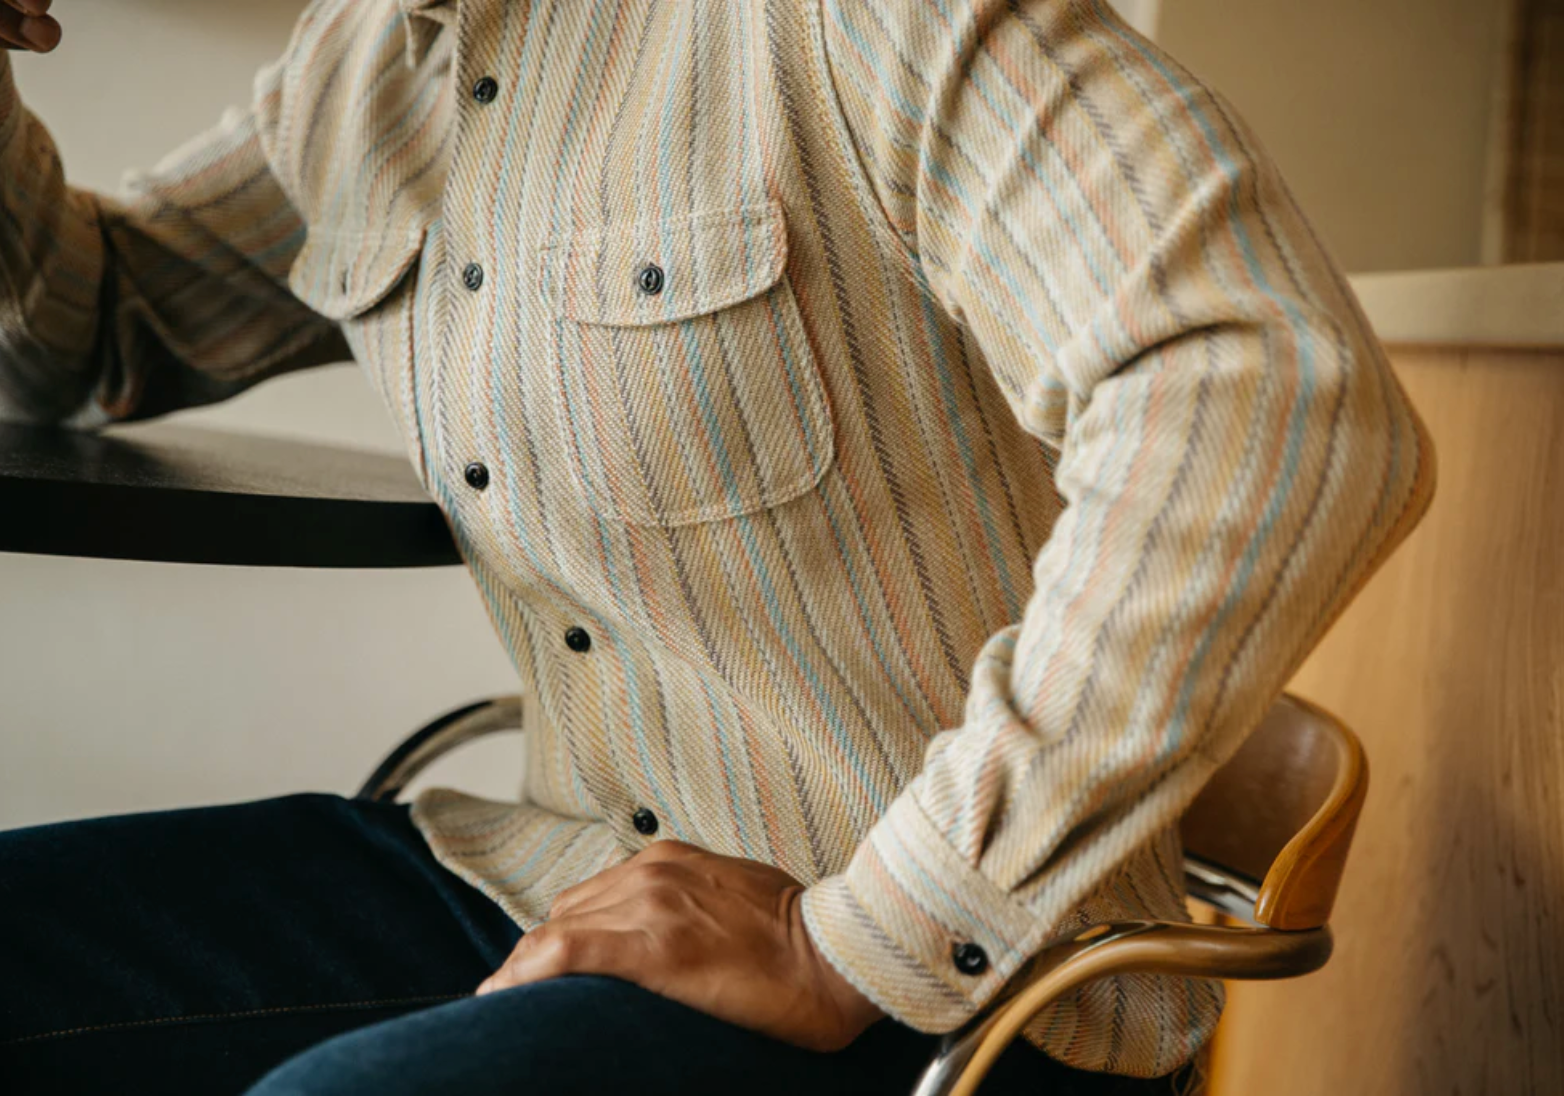 Hiroshi Kato overshirt. Loose woven Striped fabric. Inspired by the classic and rugged double pocket vintage workwear shirt. Shirt jacket, shacket. Made in USA. 100% Cotton